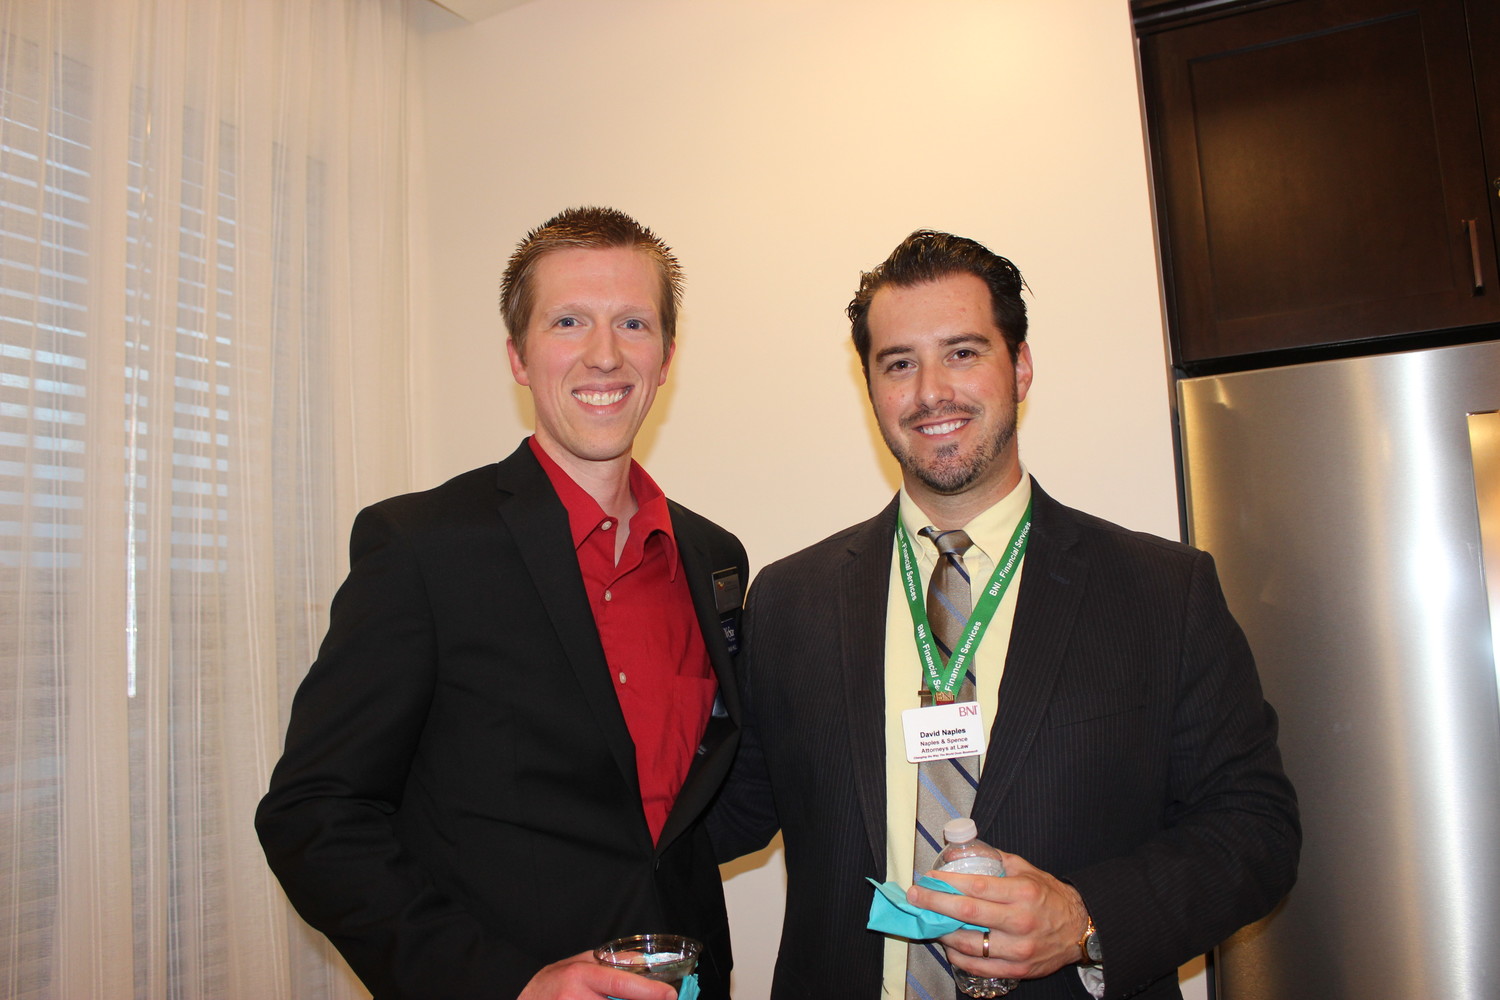 Josh Hull and David Naples at the Chamber “After Hours” event